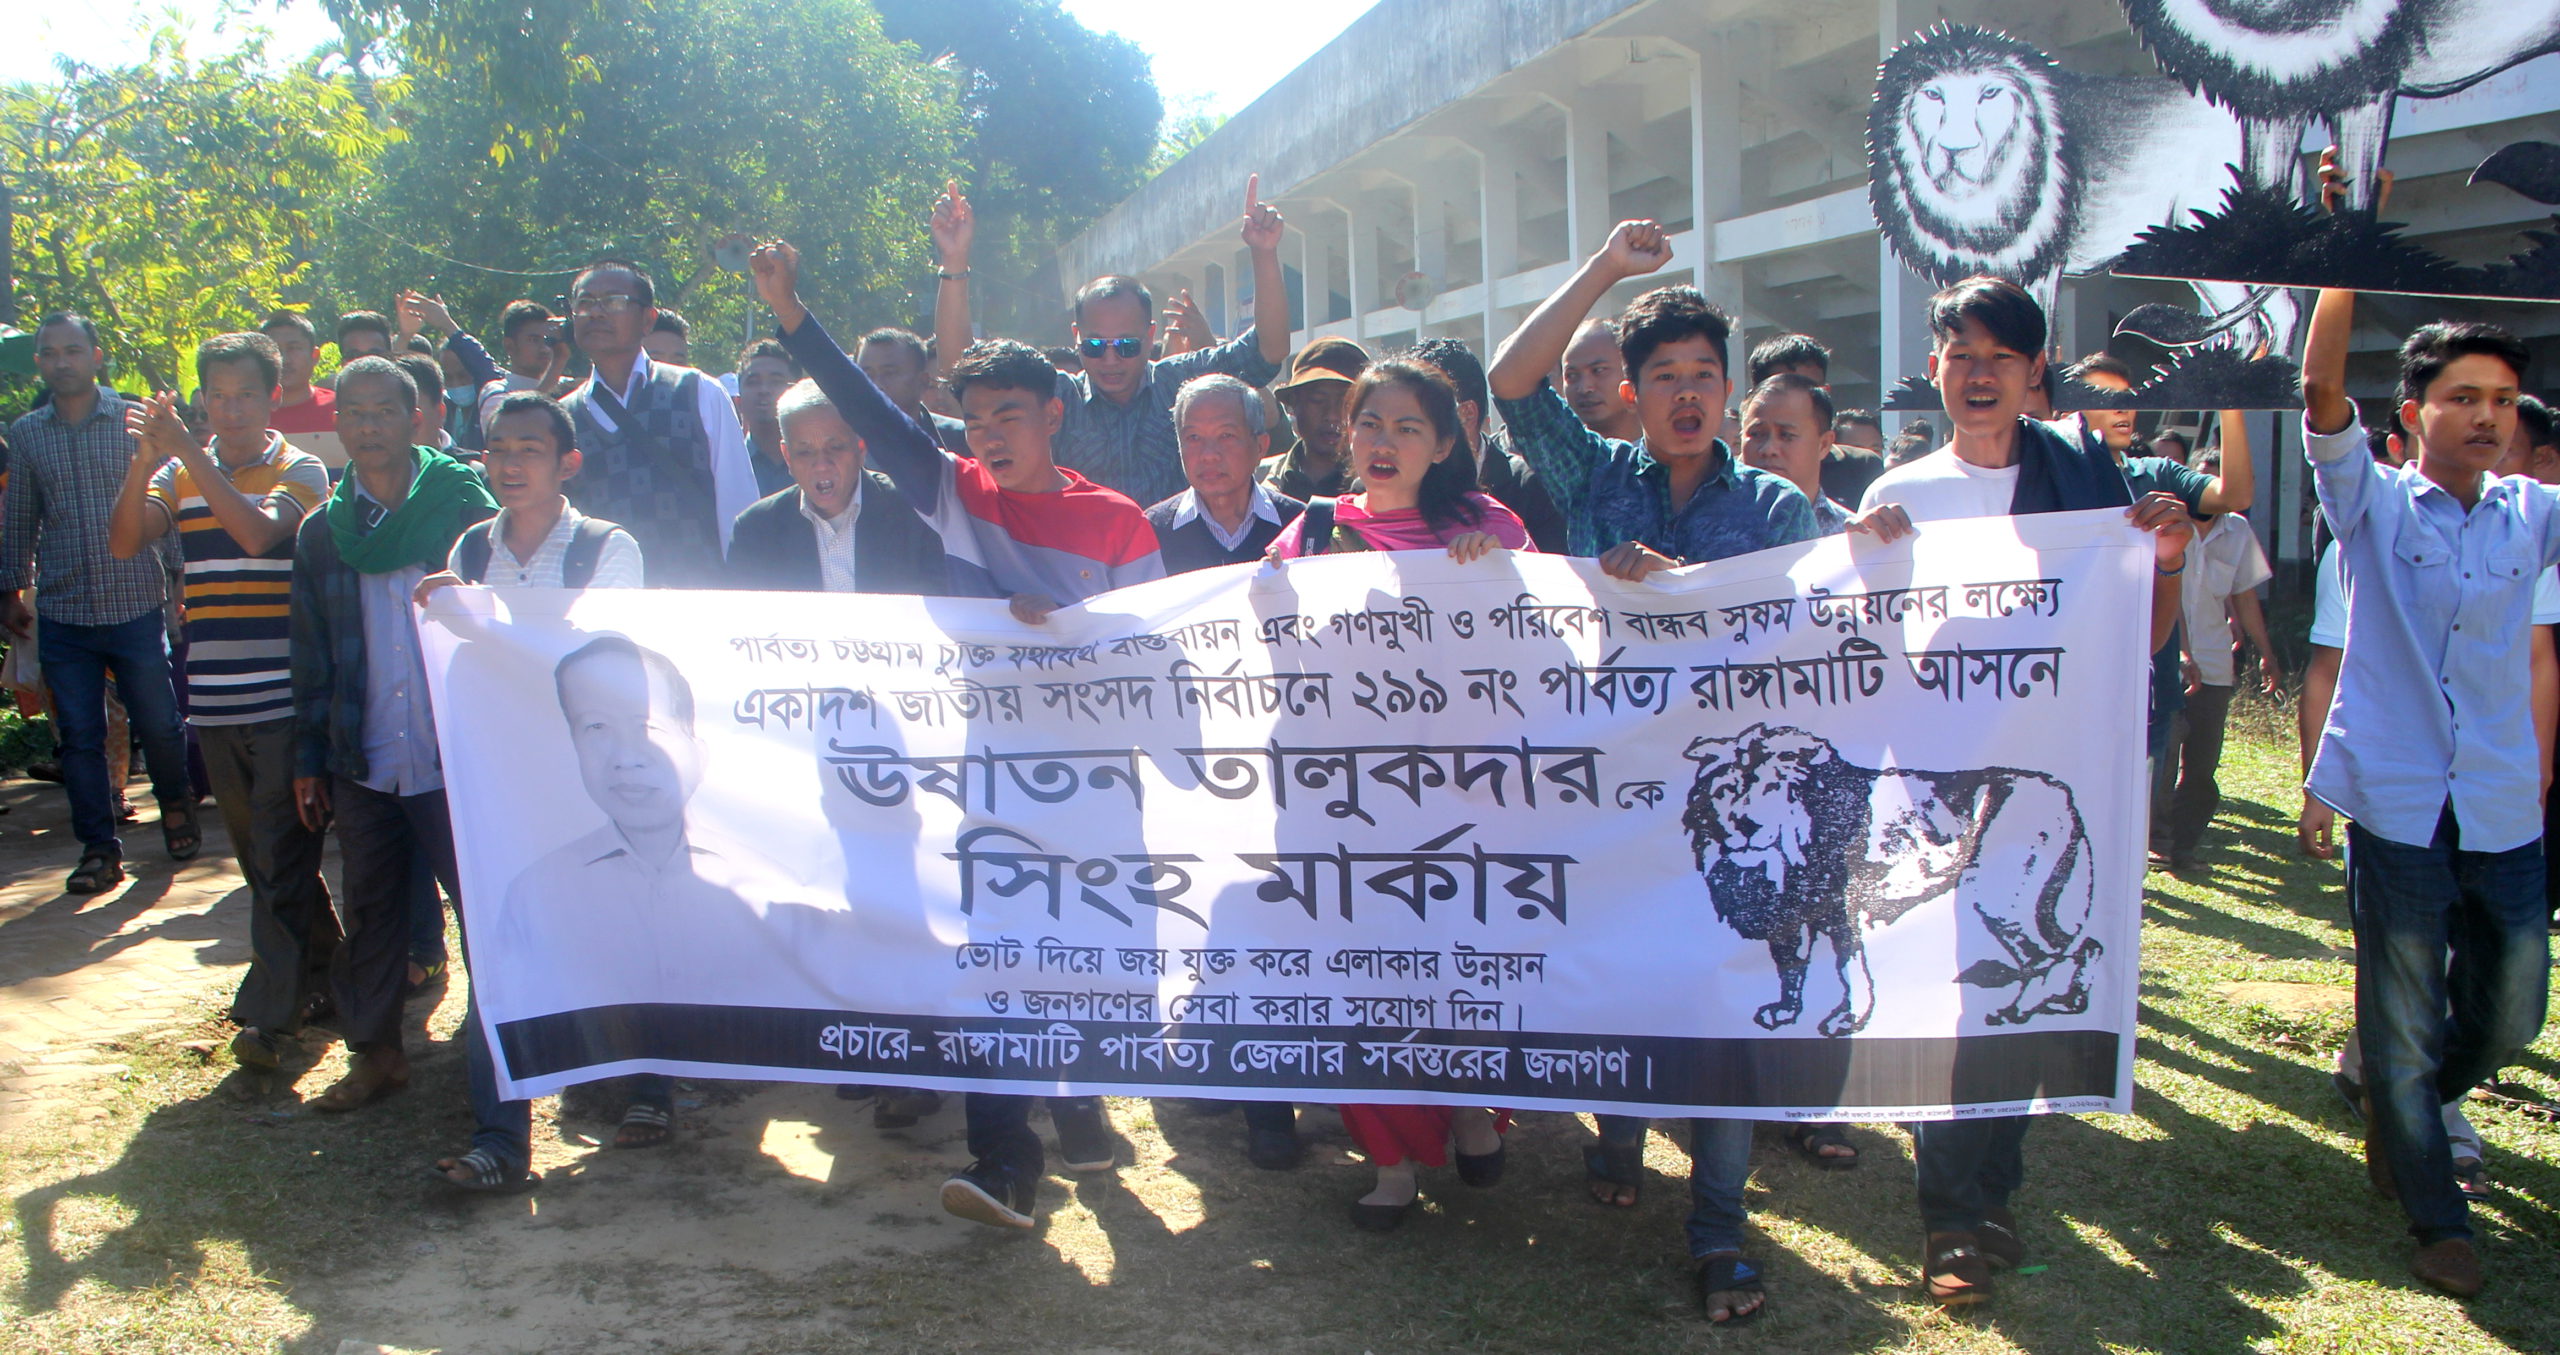 7 workers of Ushatan Talukder arrested right 3 days ahead of national elections in Rangamati